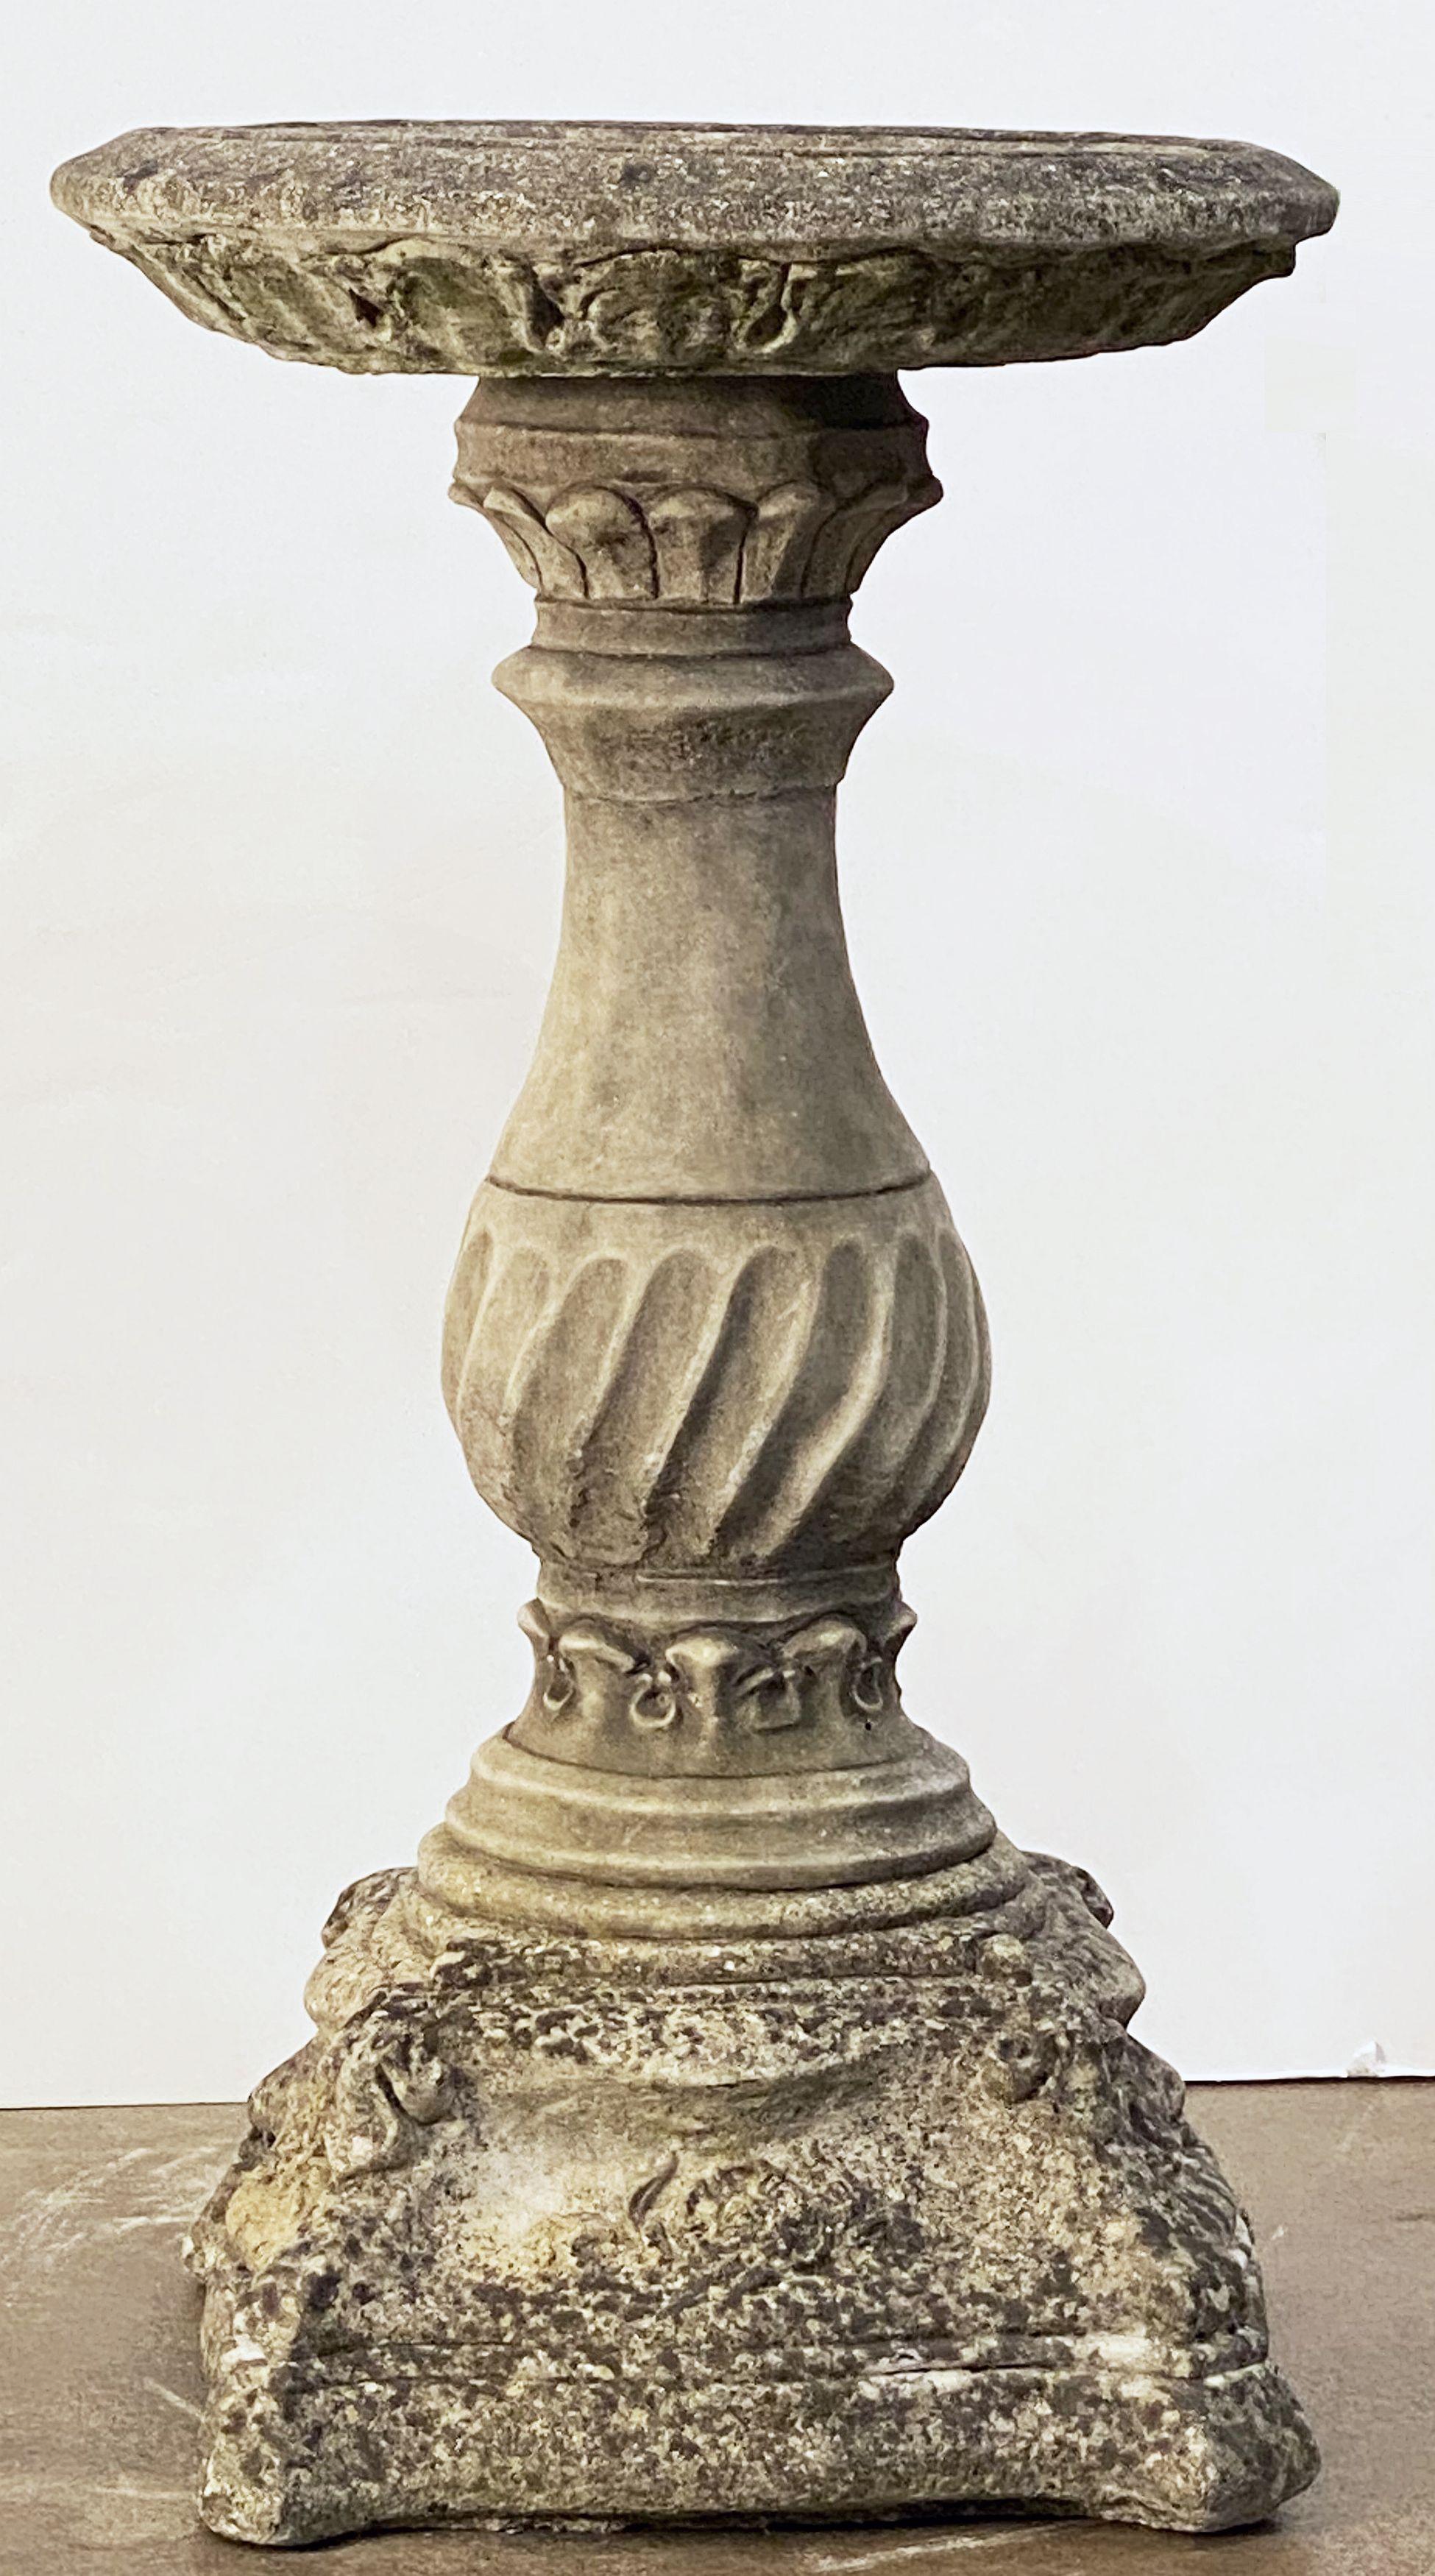 A fine English bird bath (or birdbath) of composition stone, featuring a 17 1/4 inch diameter basin top (circular) with a Classical baluster column plinth support, over a baluster pedestal with scroll design, set upon a stylish raised square plinth